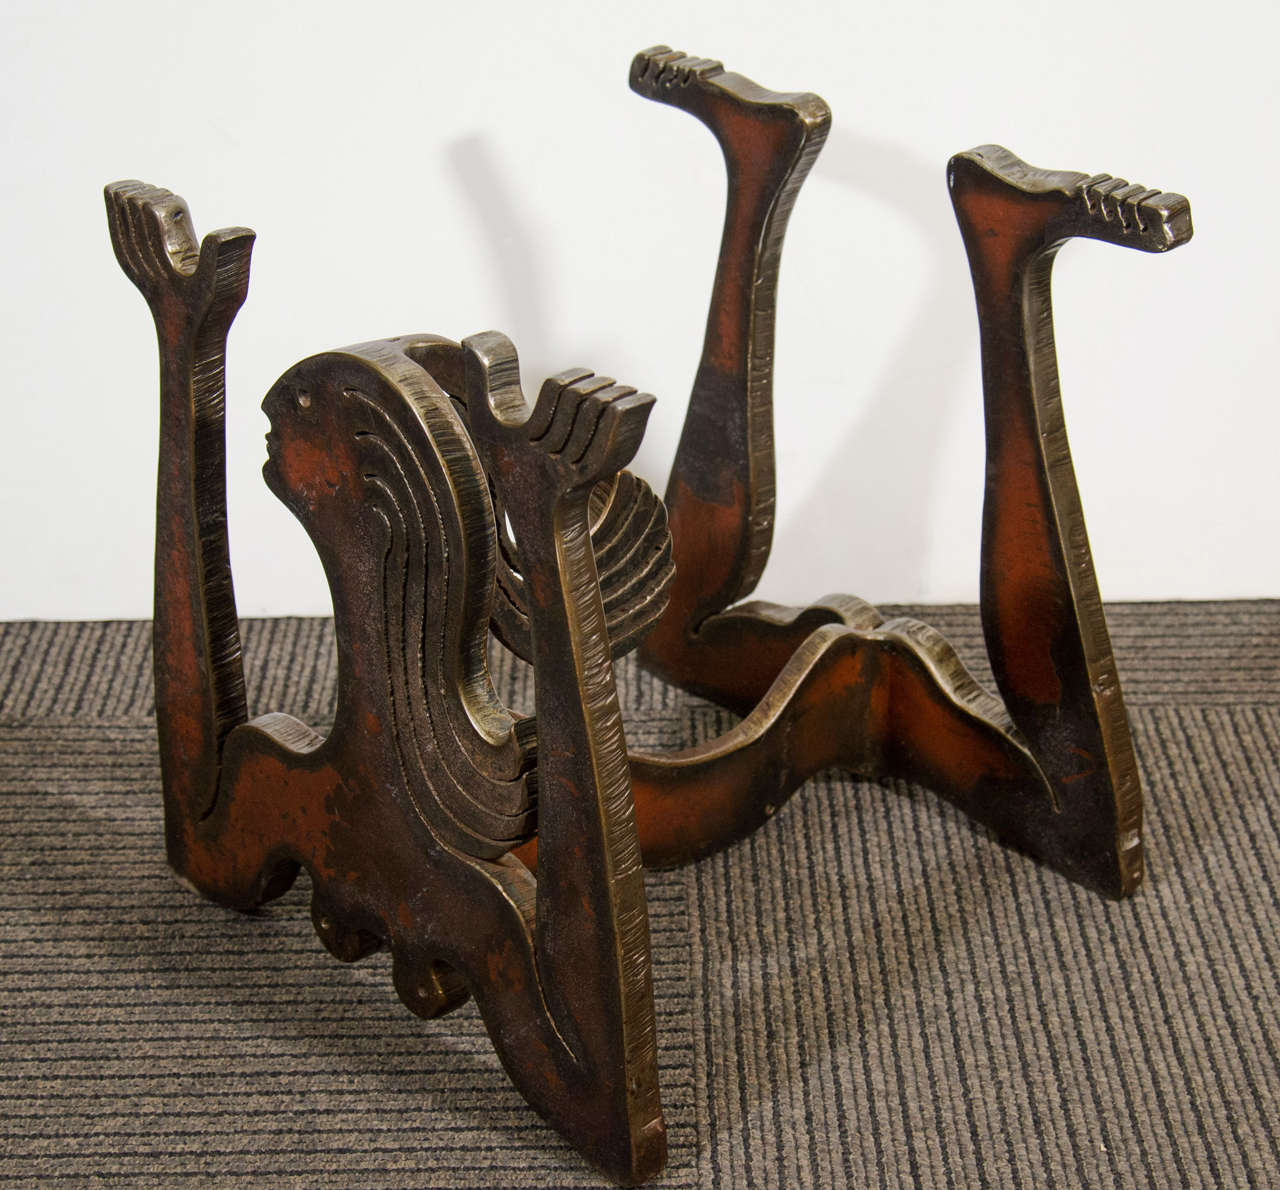 A mid century coffee or cocktail table base of a nude woman made of steel high beams.  The base is by Rochester, New York sculptor Albert Leon Wilson.   The woman's hands and feet are used to balance a 3/4